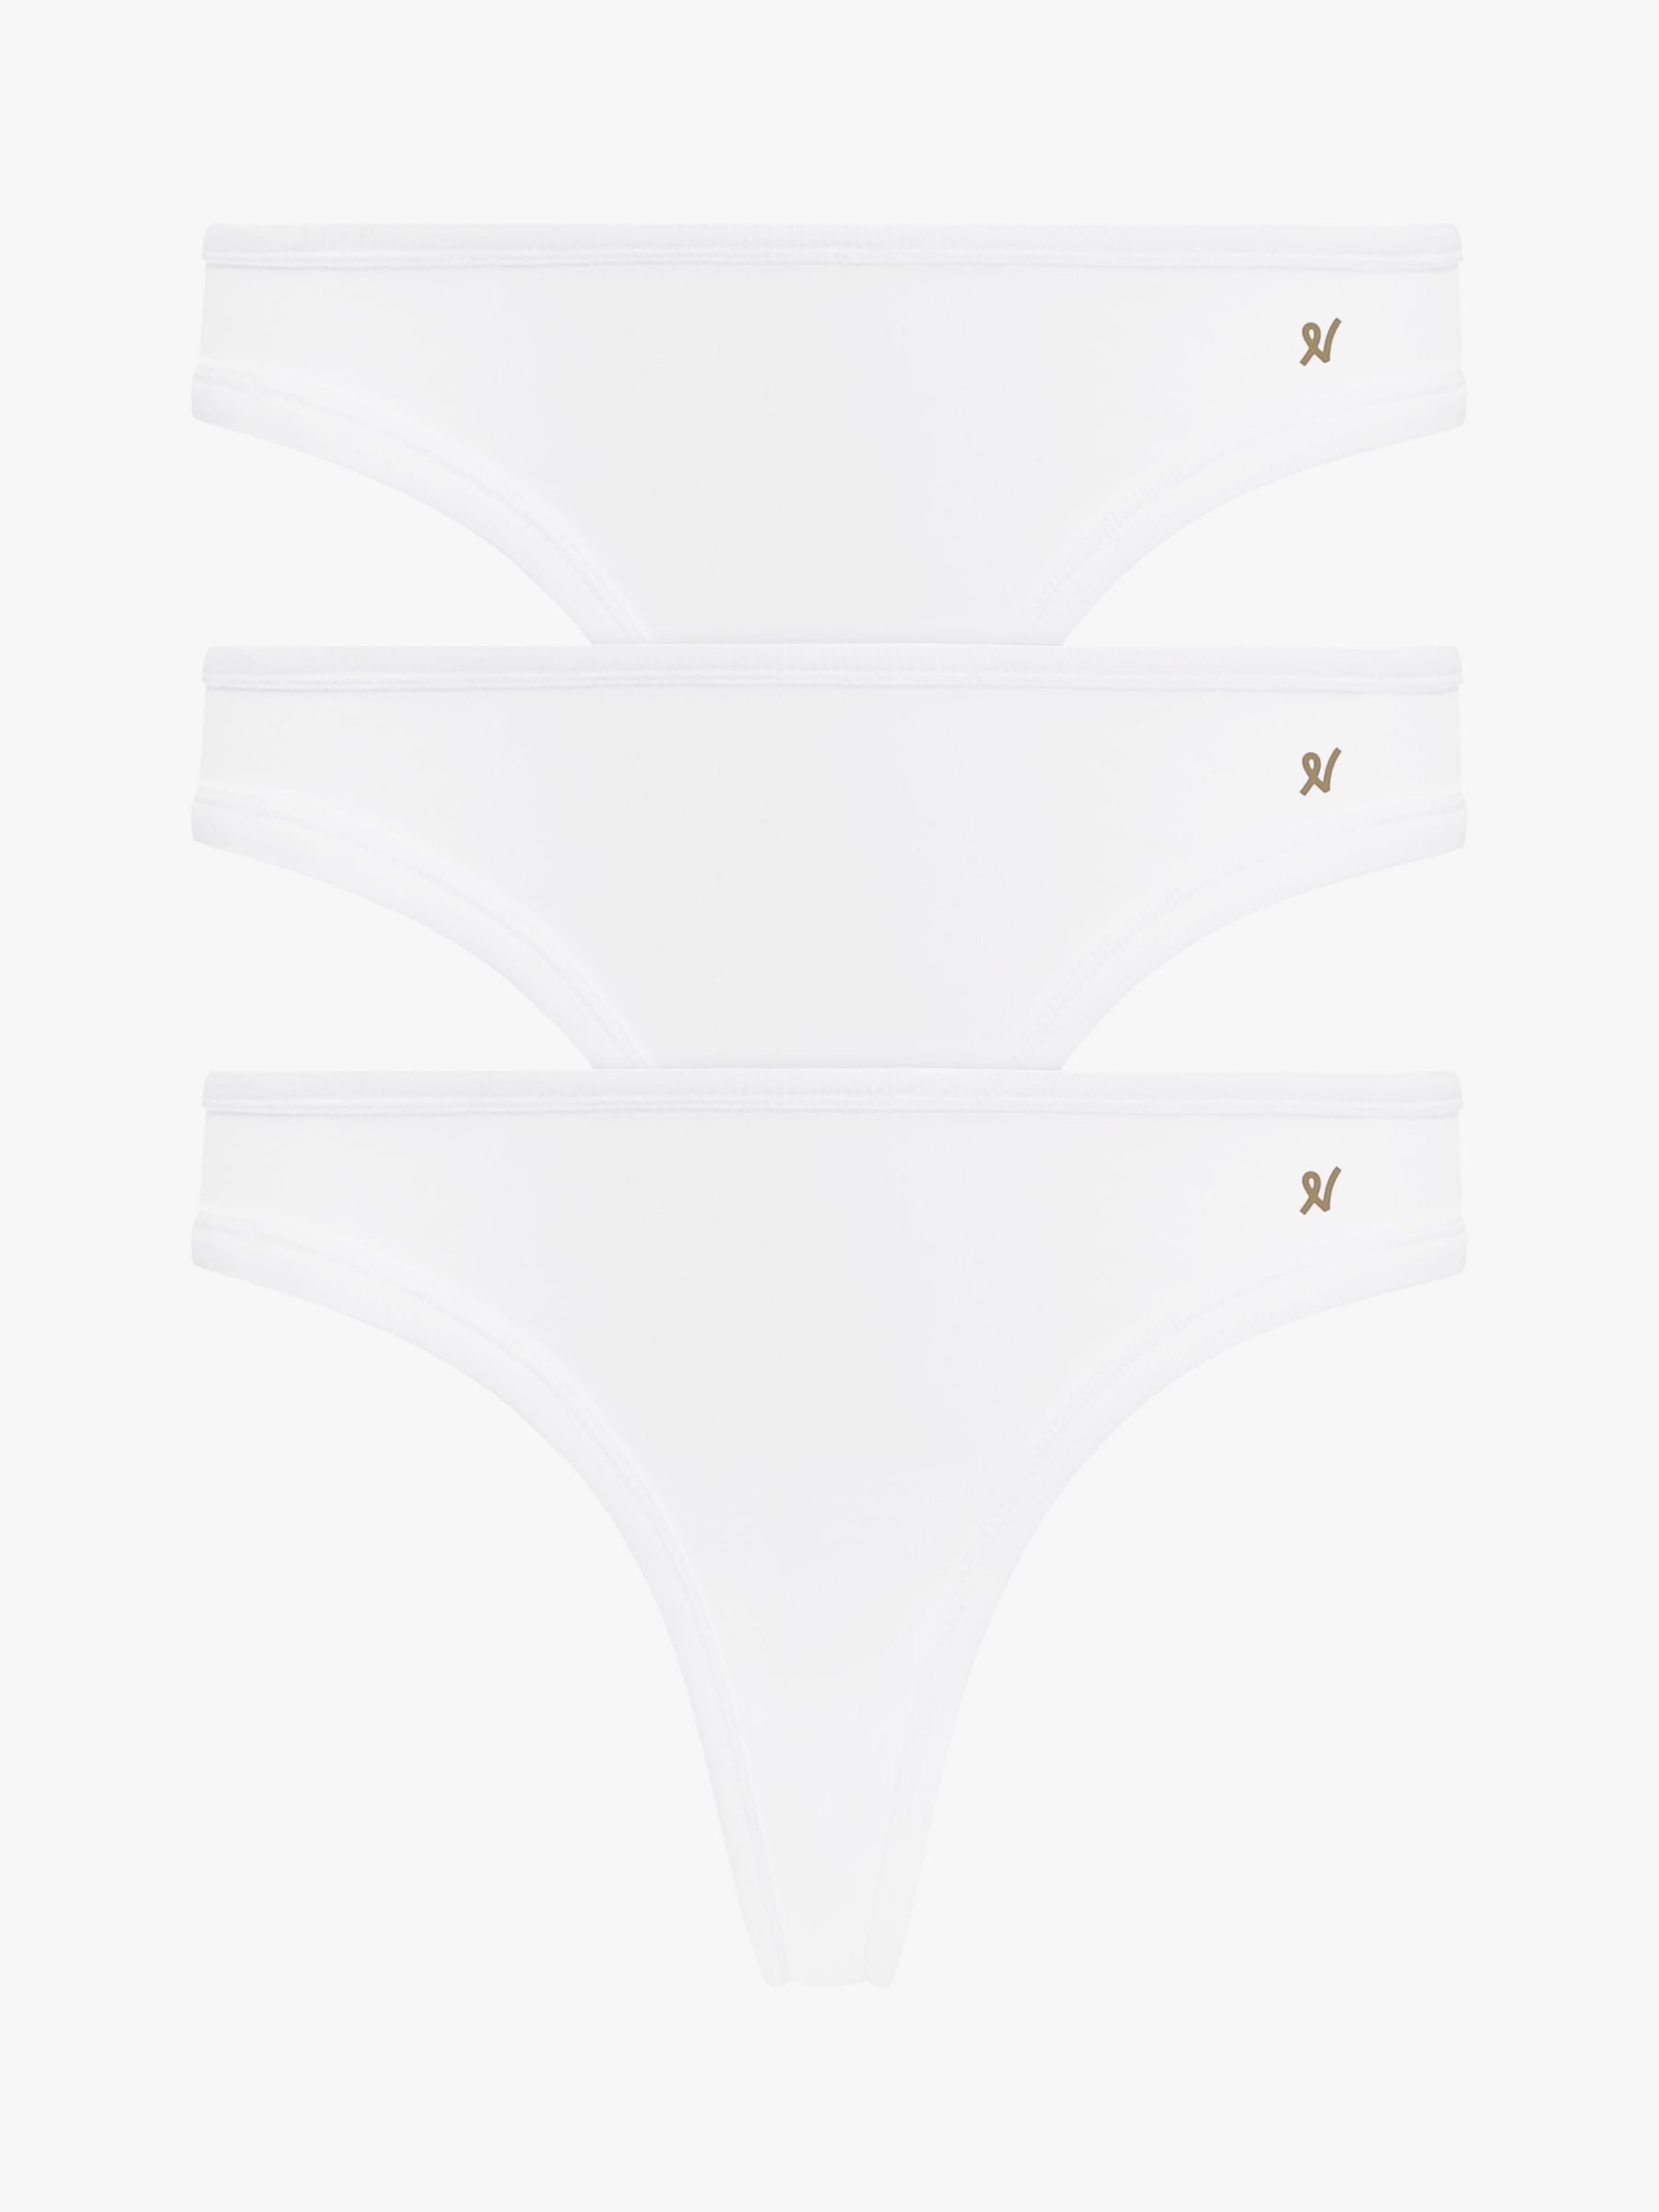 Nudea The Dipped Organic Cotton Blend Thong, Pack of 3, White, XS